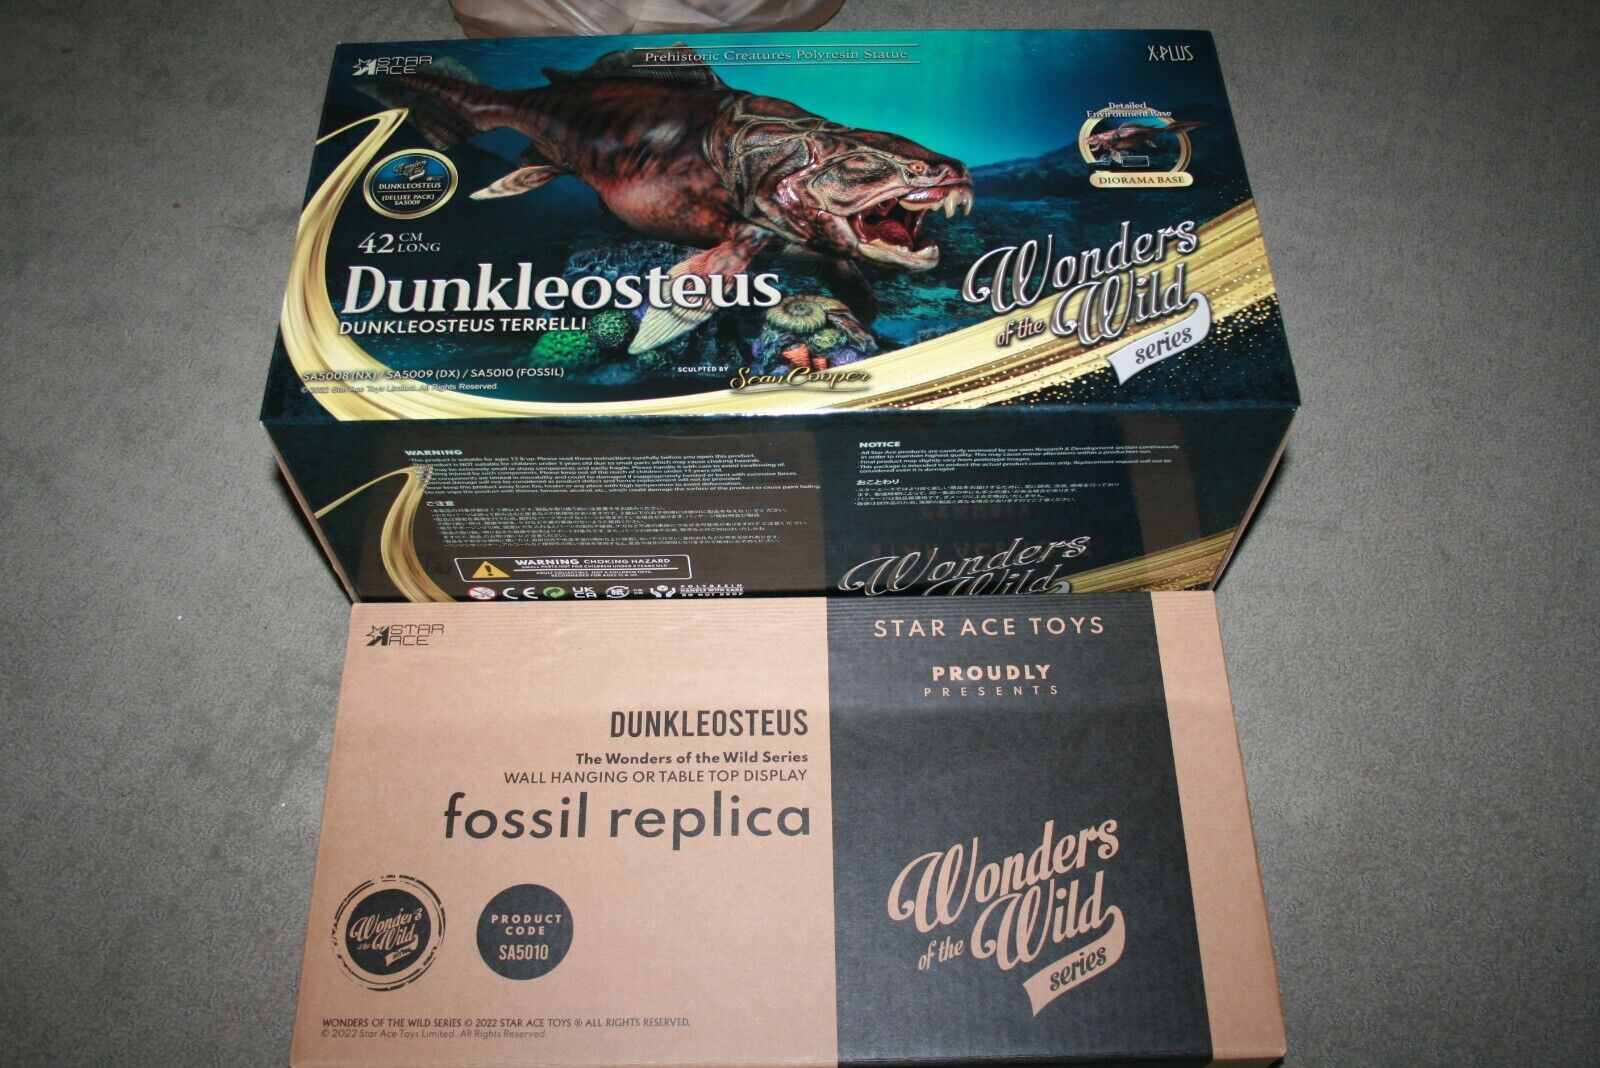 Star Ace X Plus Wonders of the Wild DUNKLEOSTEUS Deluxe Fossil Replica